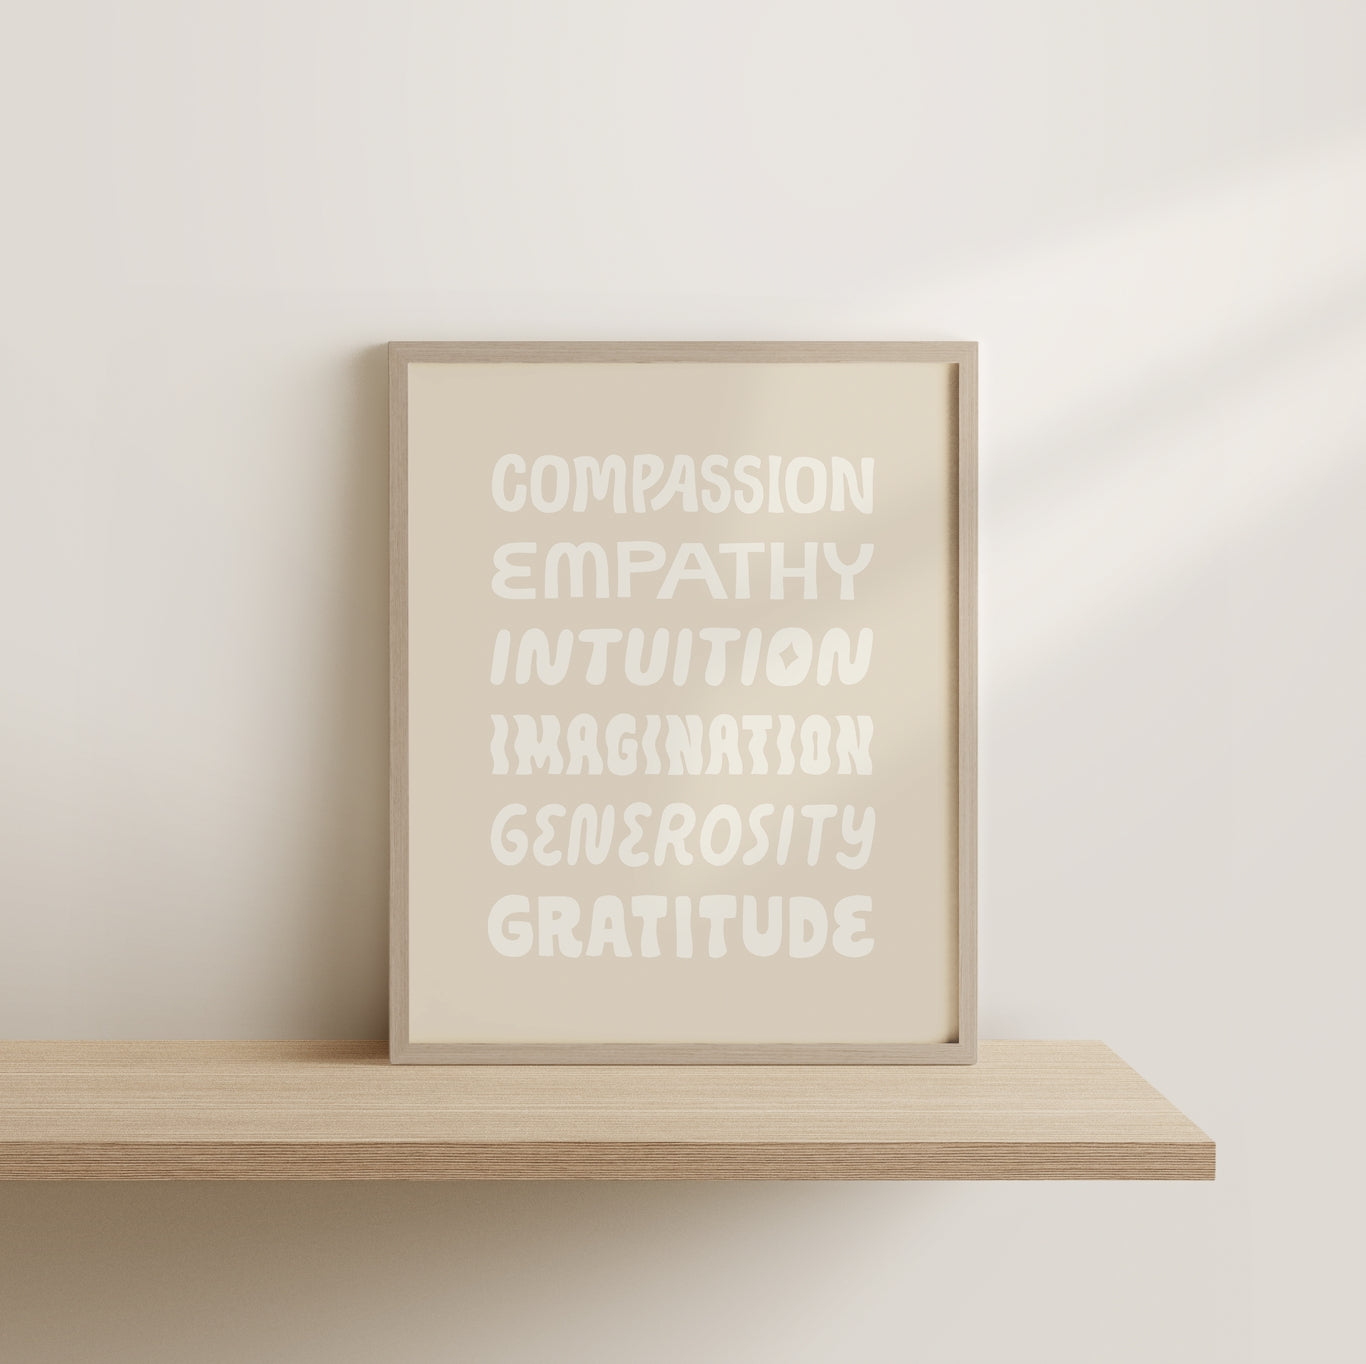 Each word was completely drawn by hand and screen printed with love. This print is designed to focus your intention in your daily life and makes a beautiful gift for a loved one or in a nursery too. We are all the products of who and what we surround ourselves with.